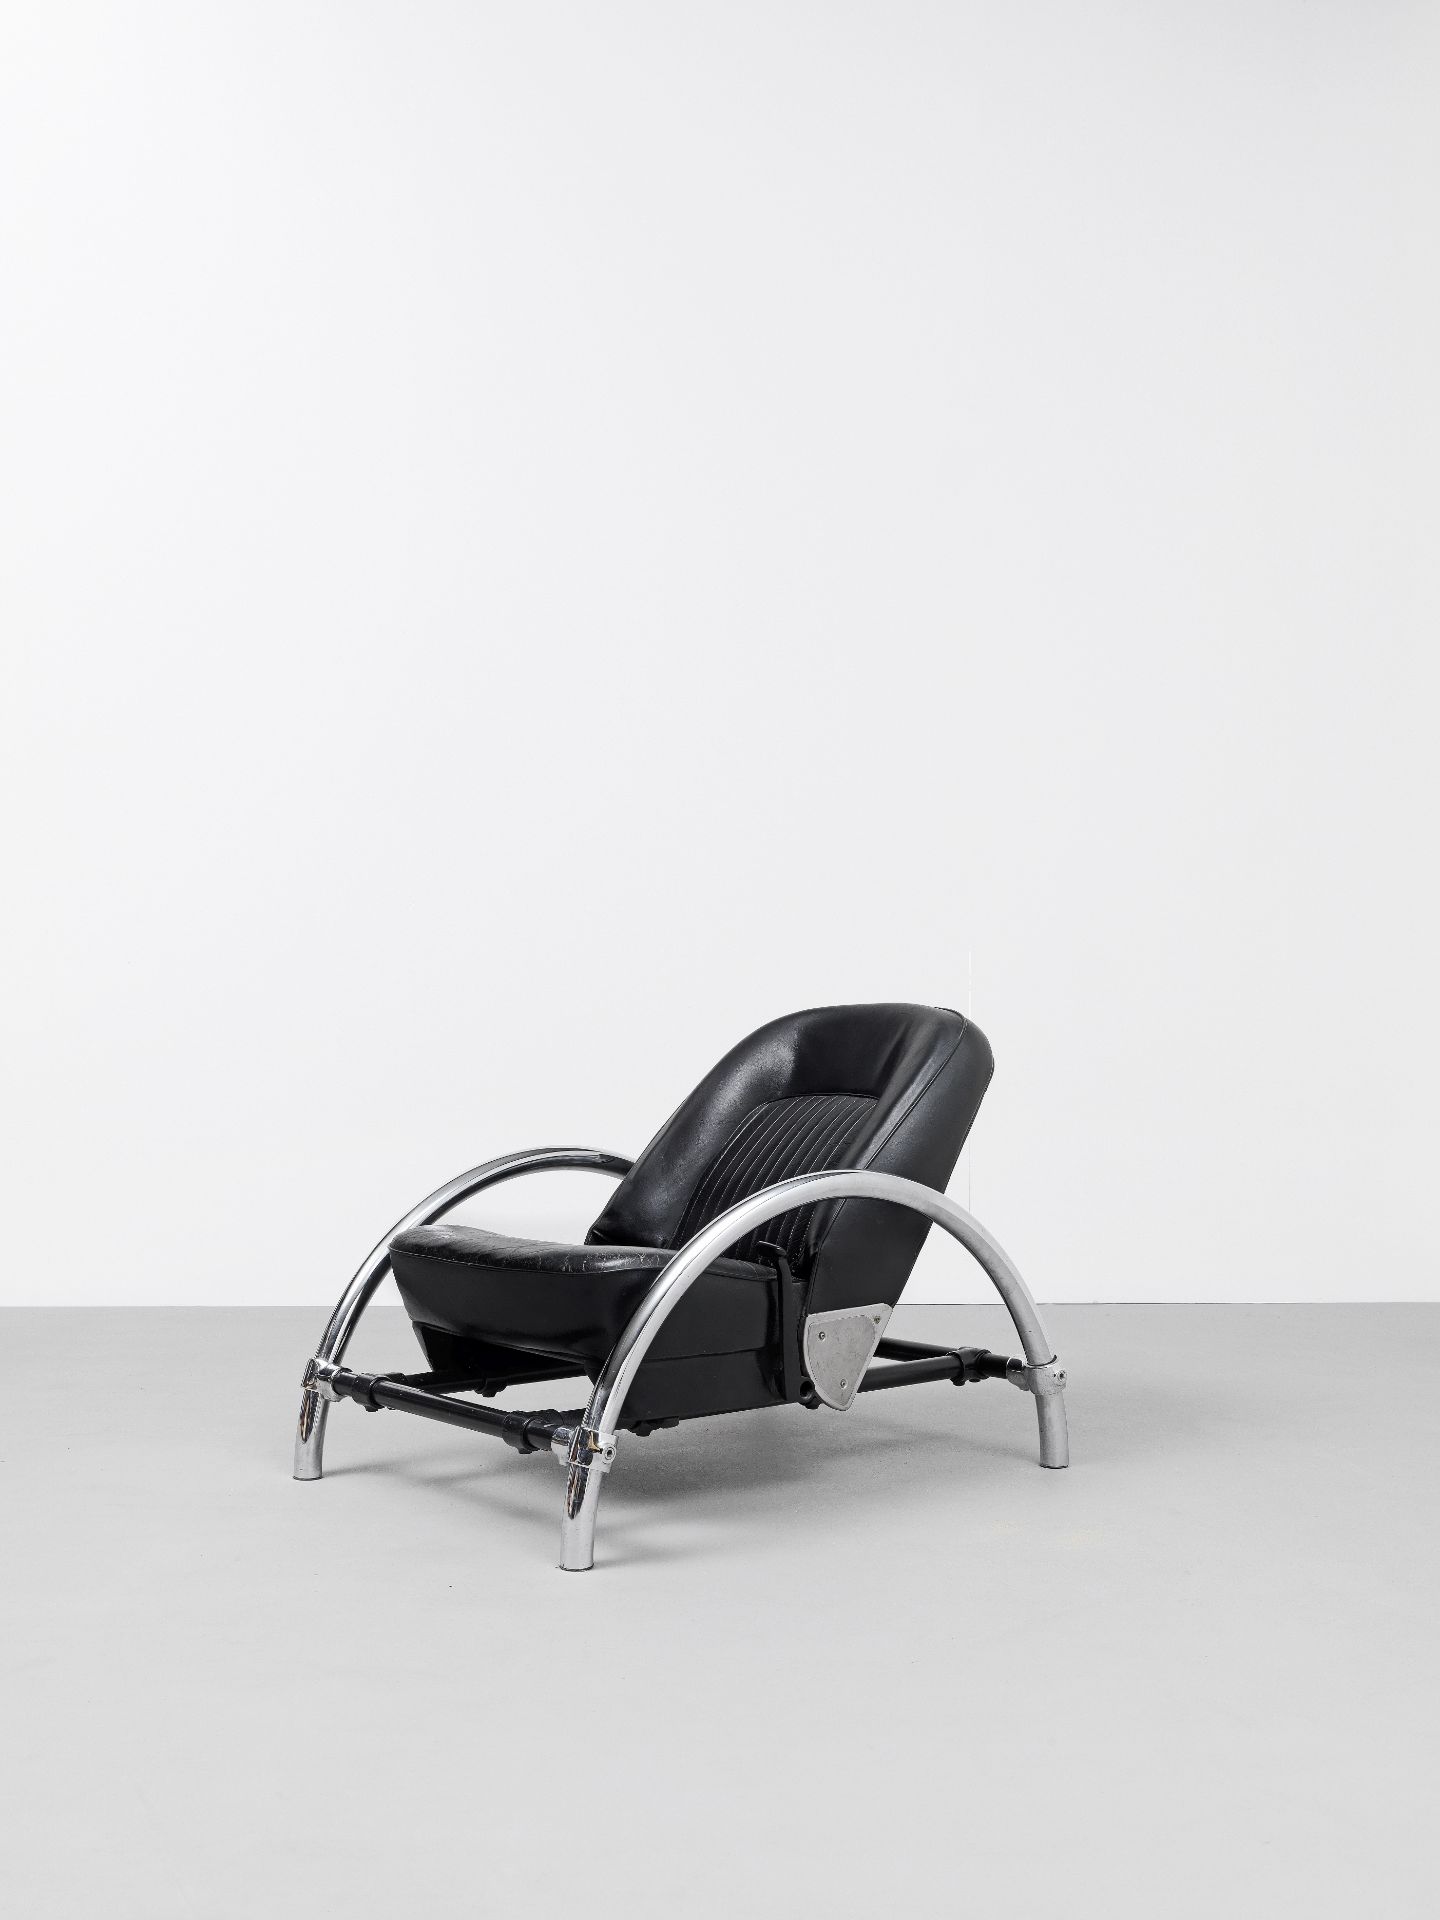 Ron Arad 'Rover' chair, designed 1981, produced mid-1980s